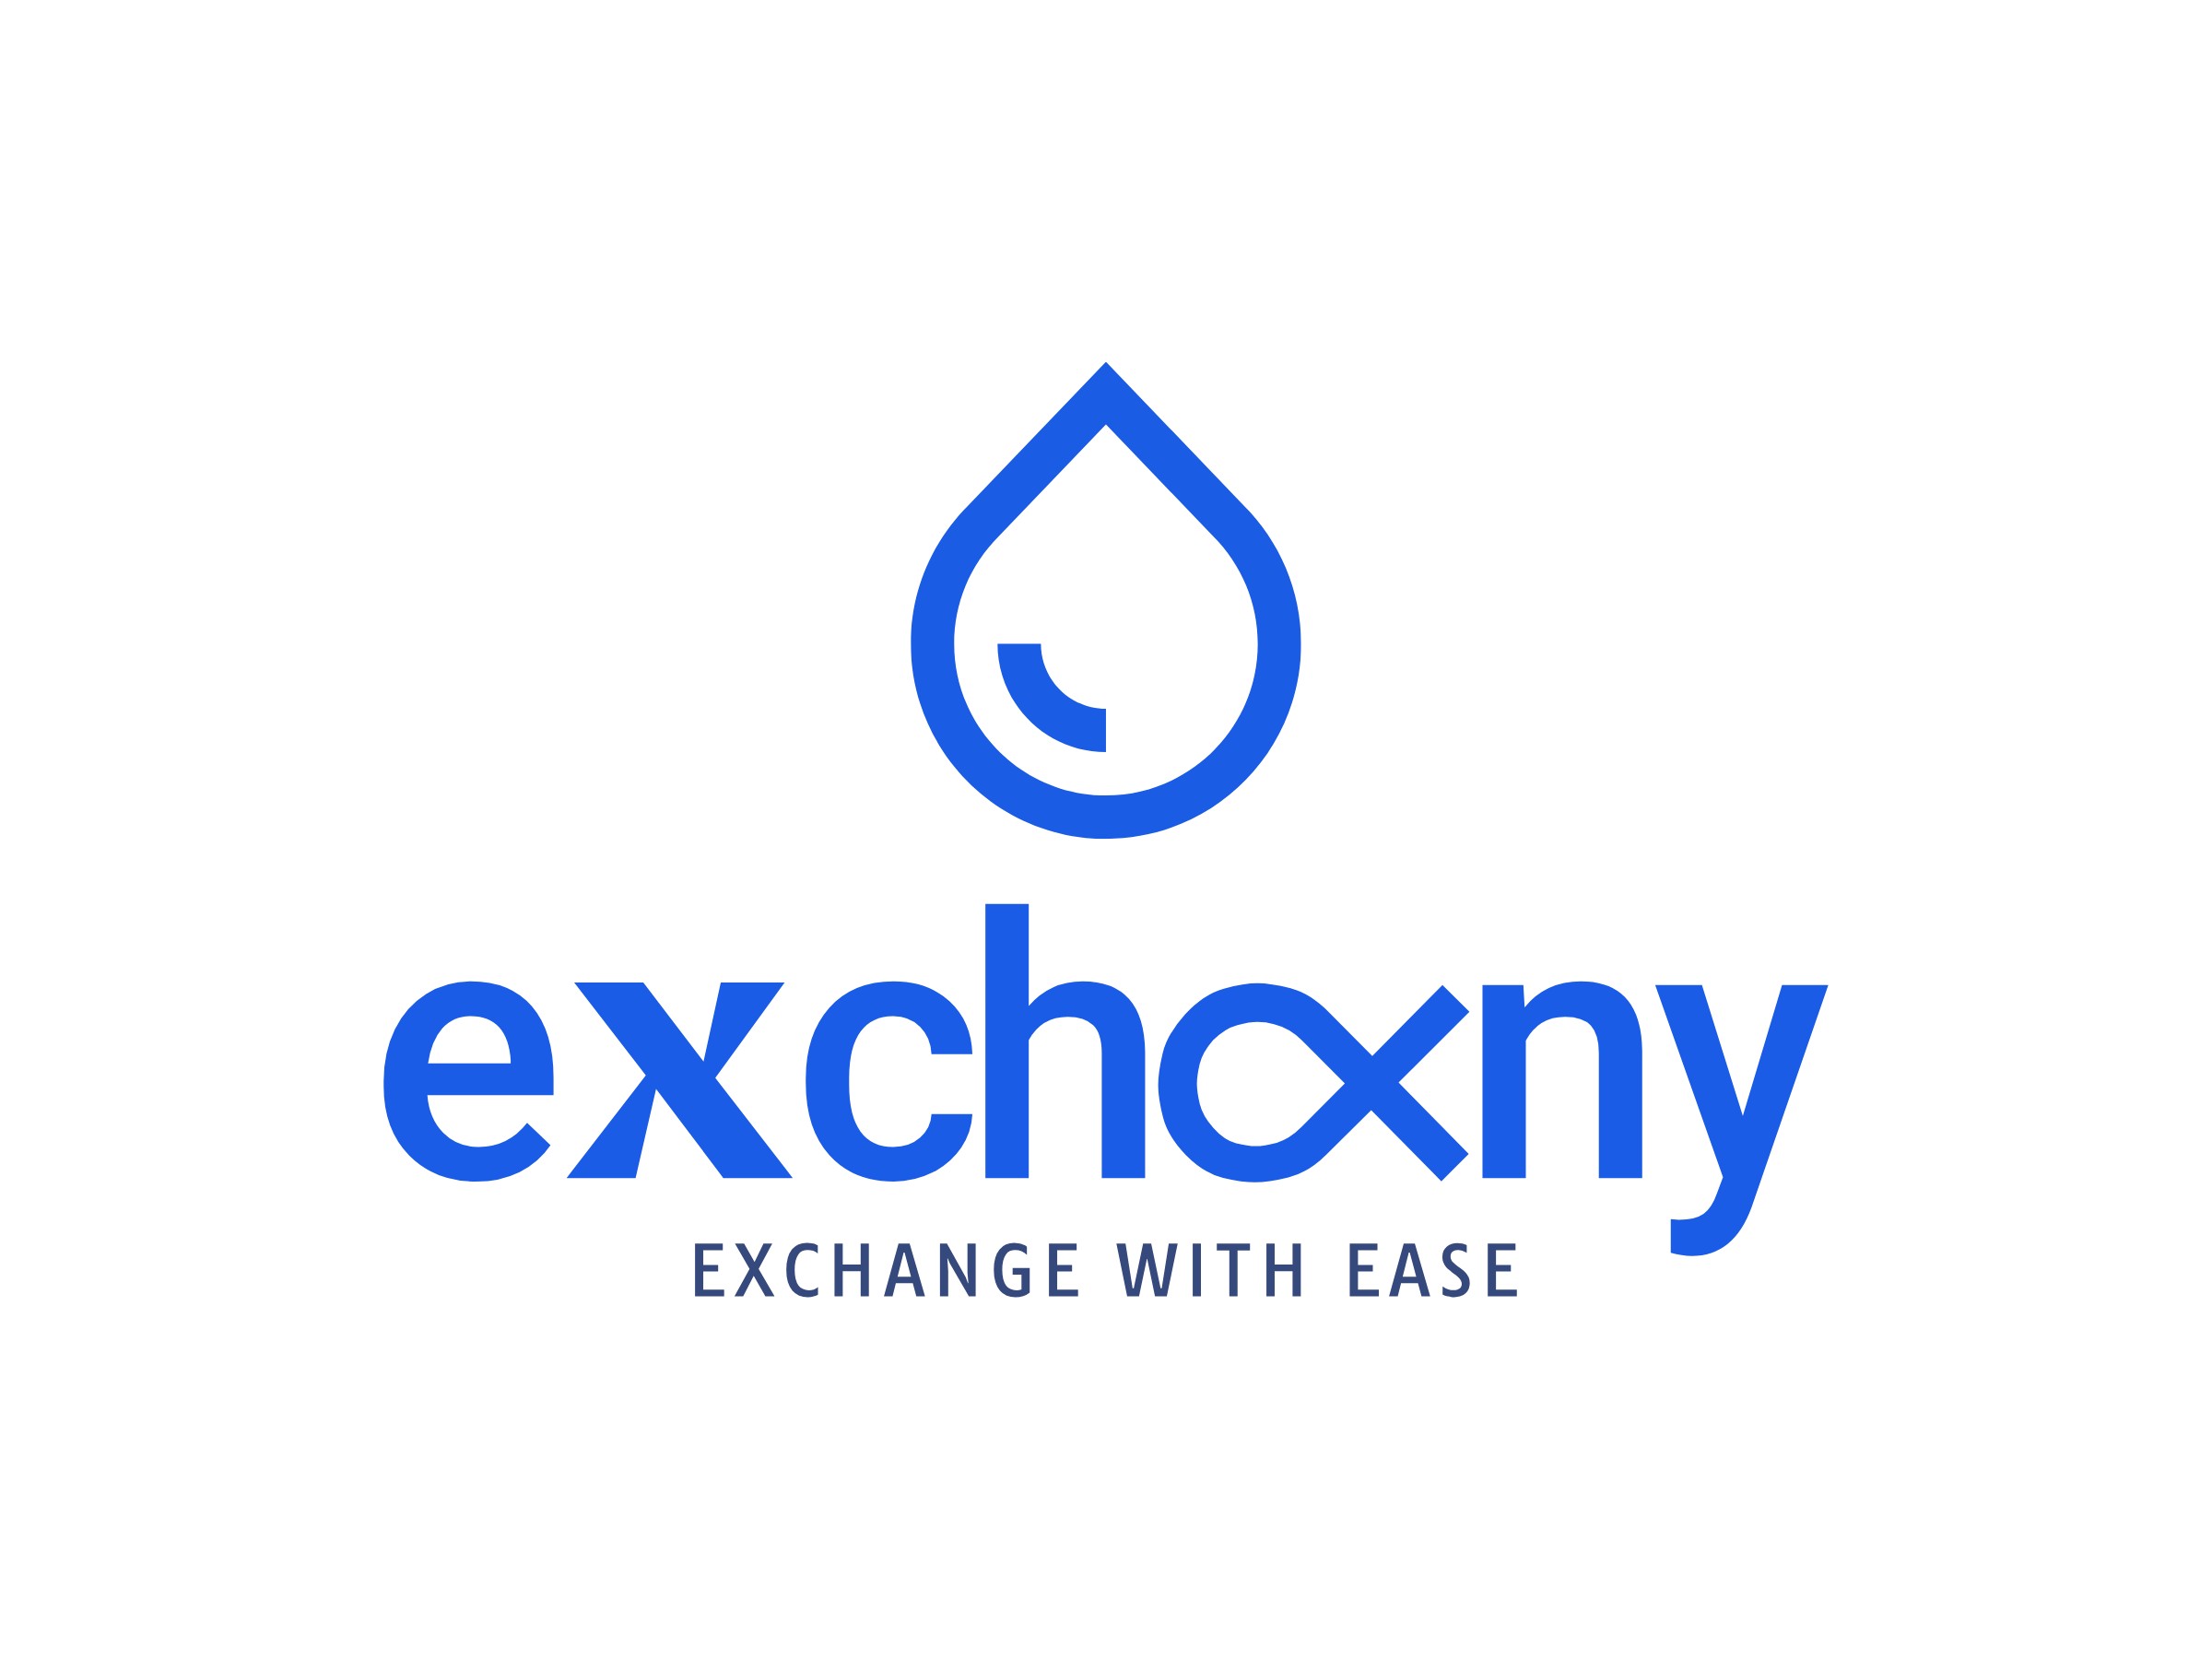 exchany - Exchange with Ease